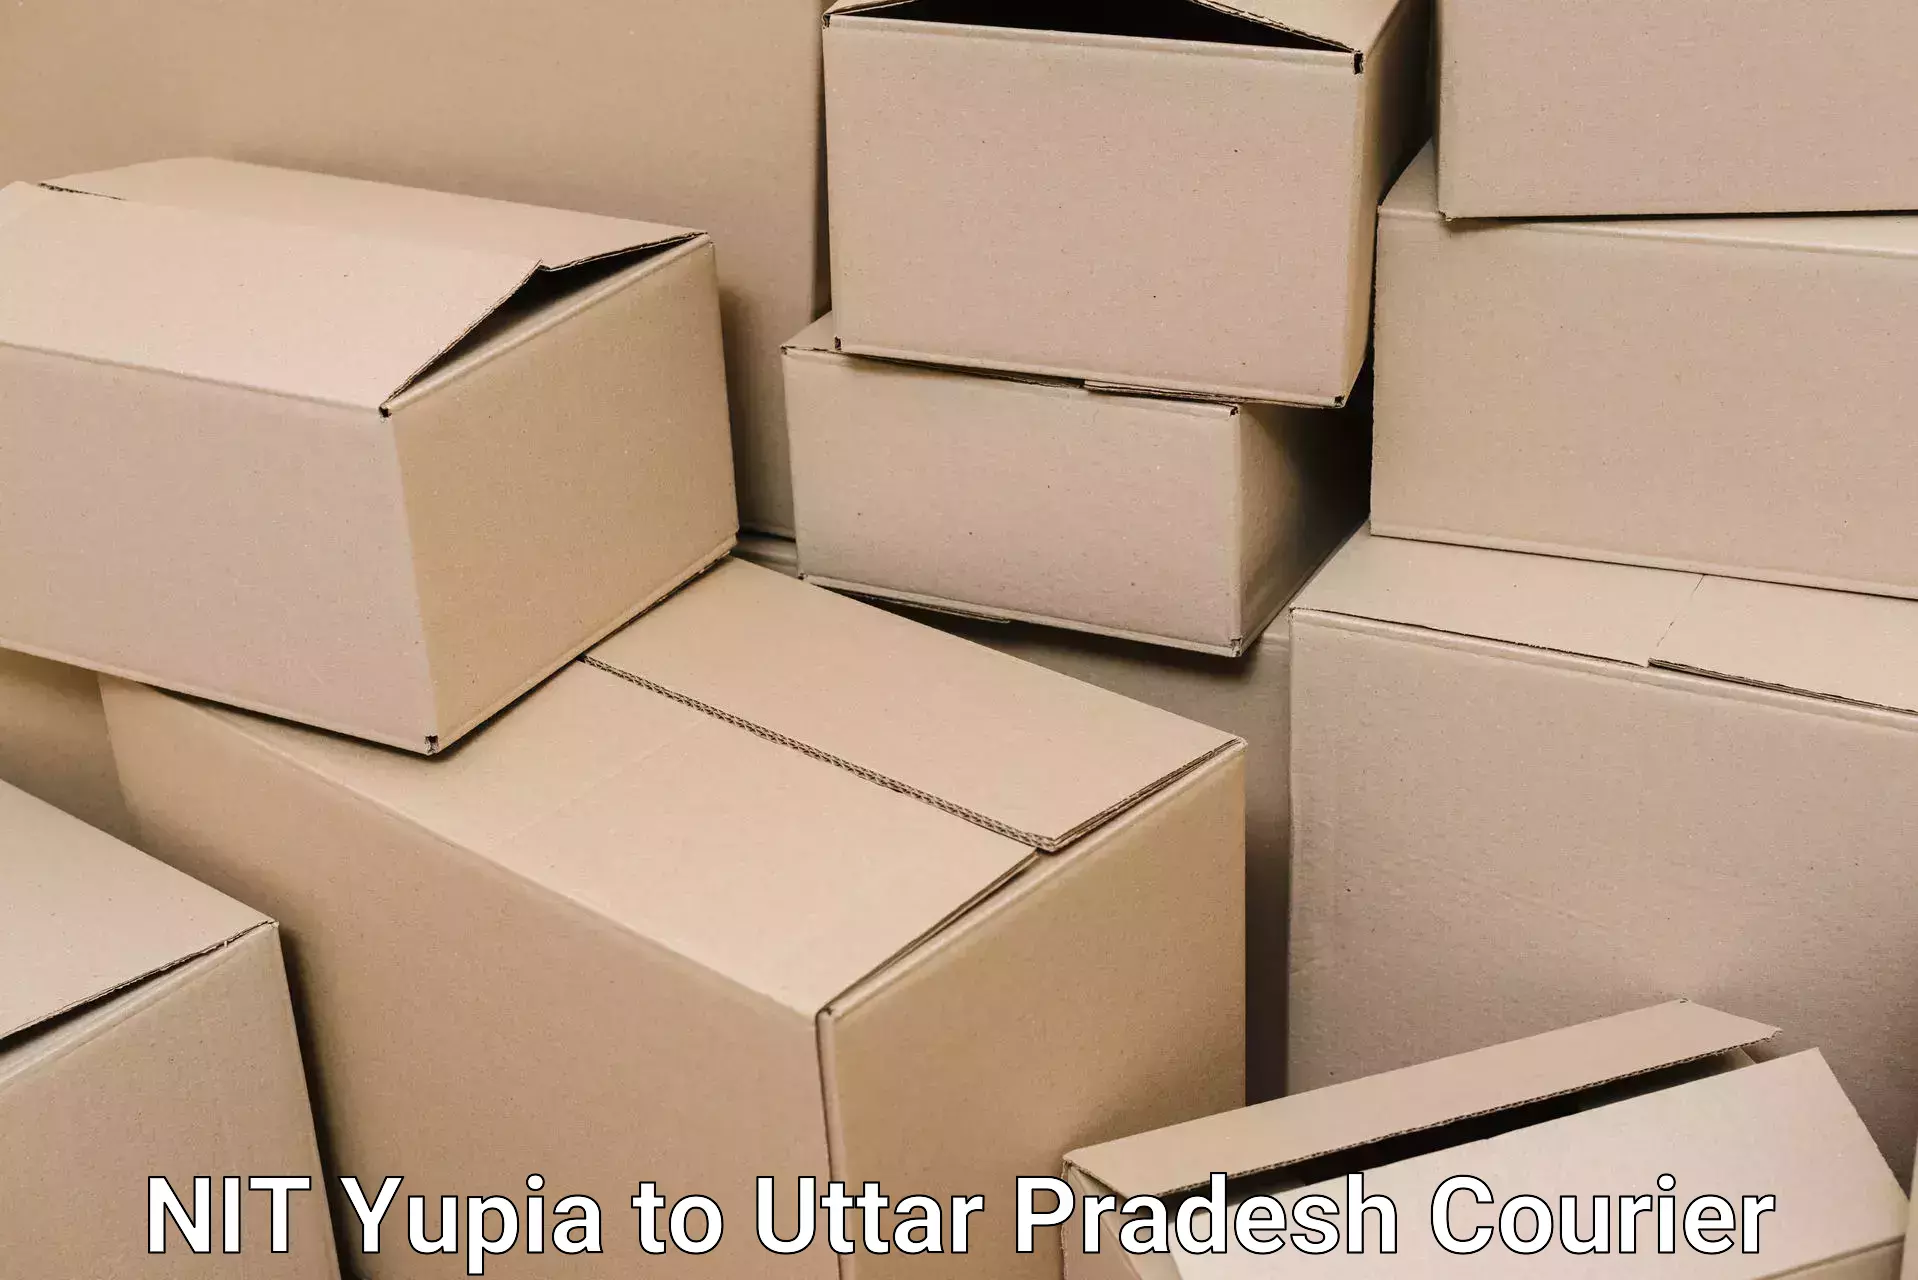 Quality relocation services NIT Yupia to Sikandara